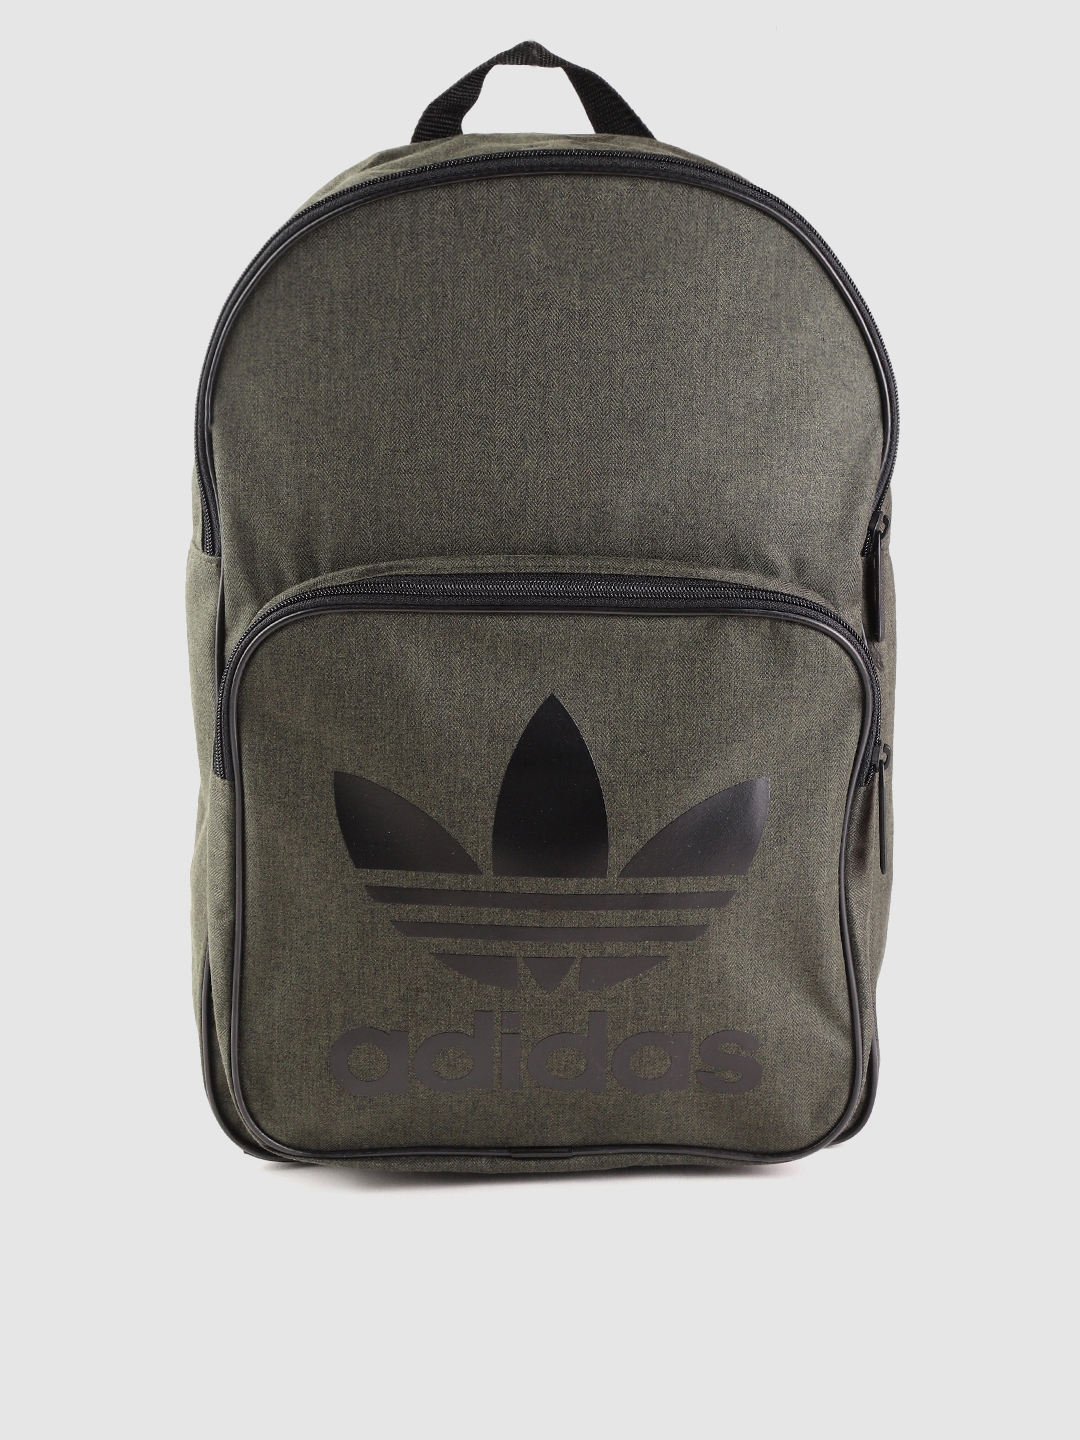 backpack adidas classic